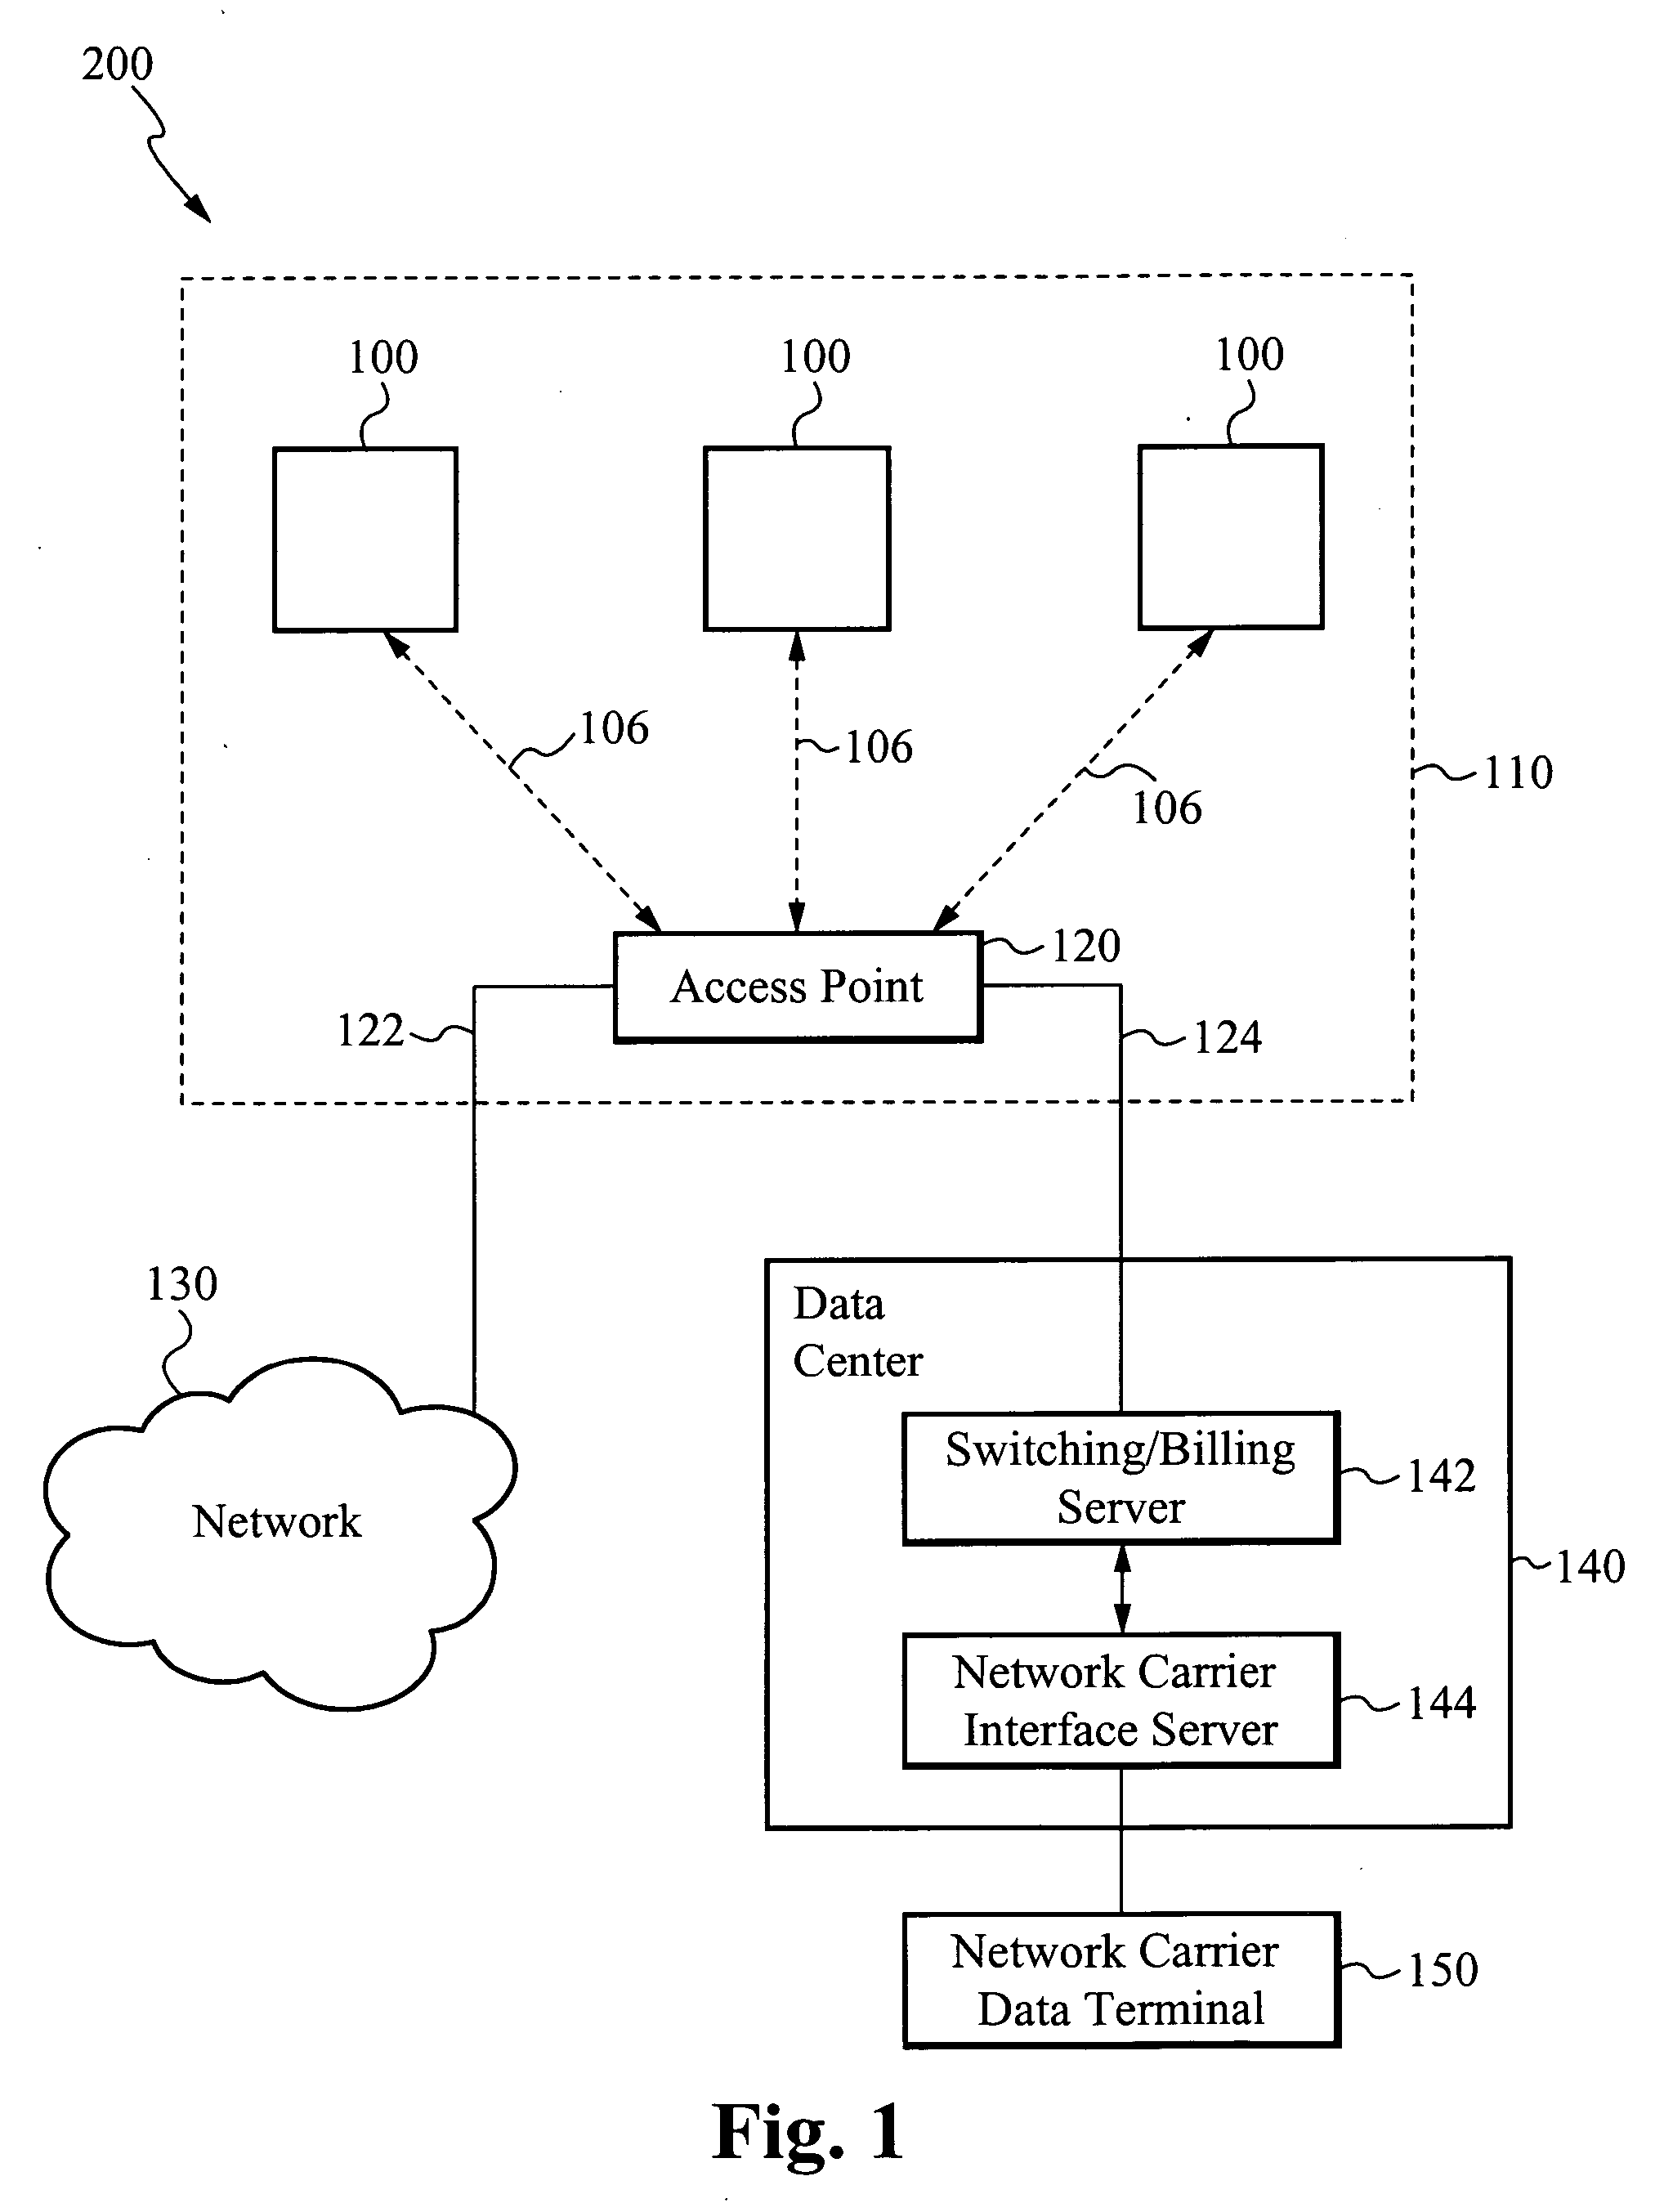 Access point with controller for billing and generating income for access point owner